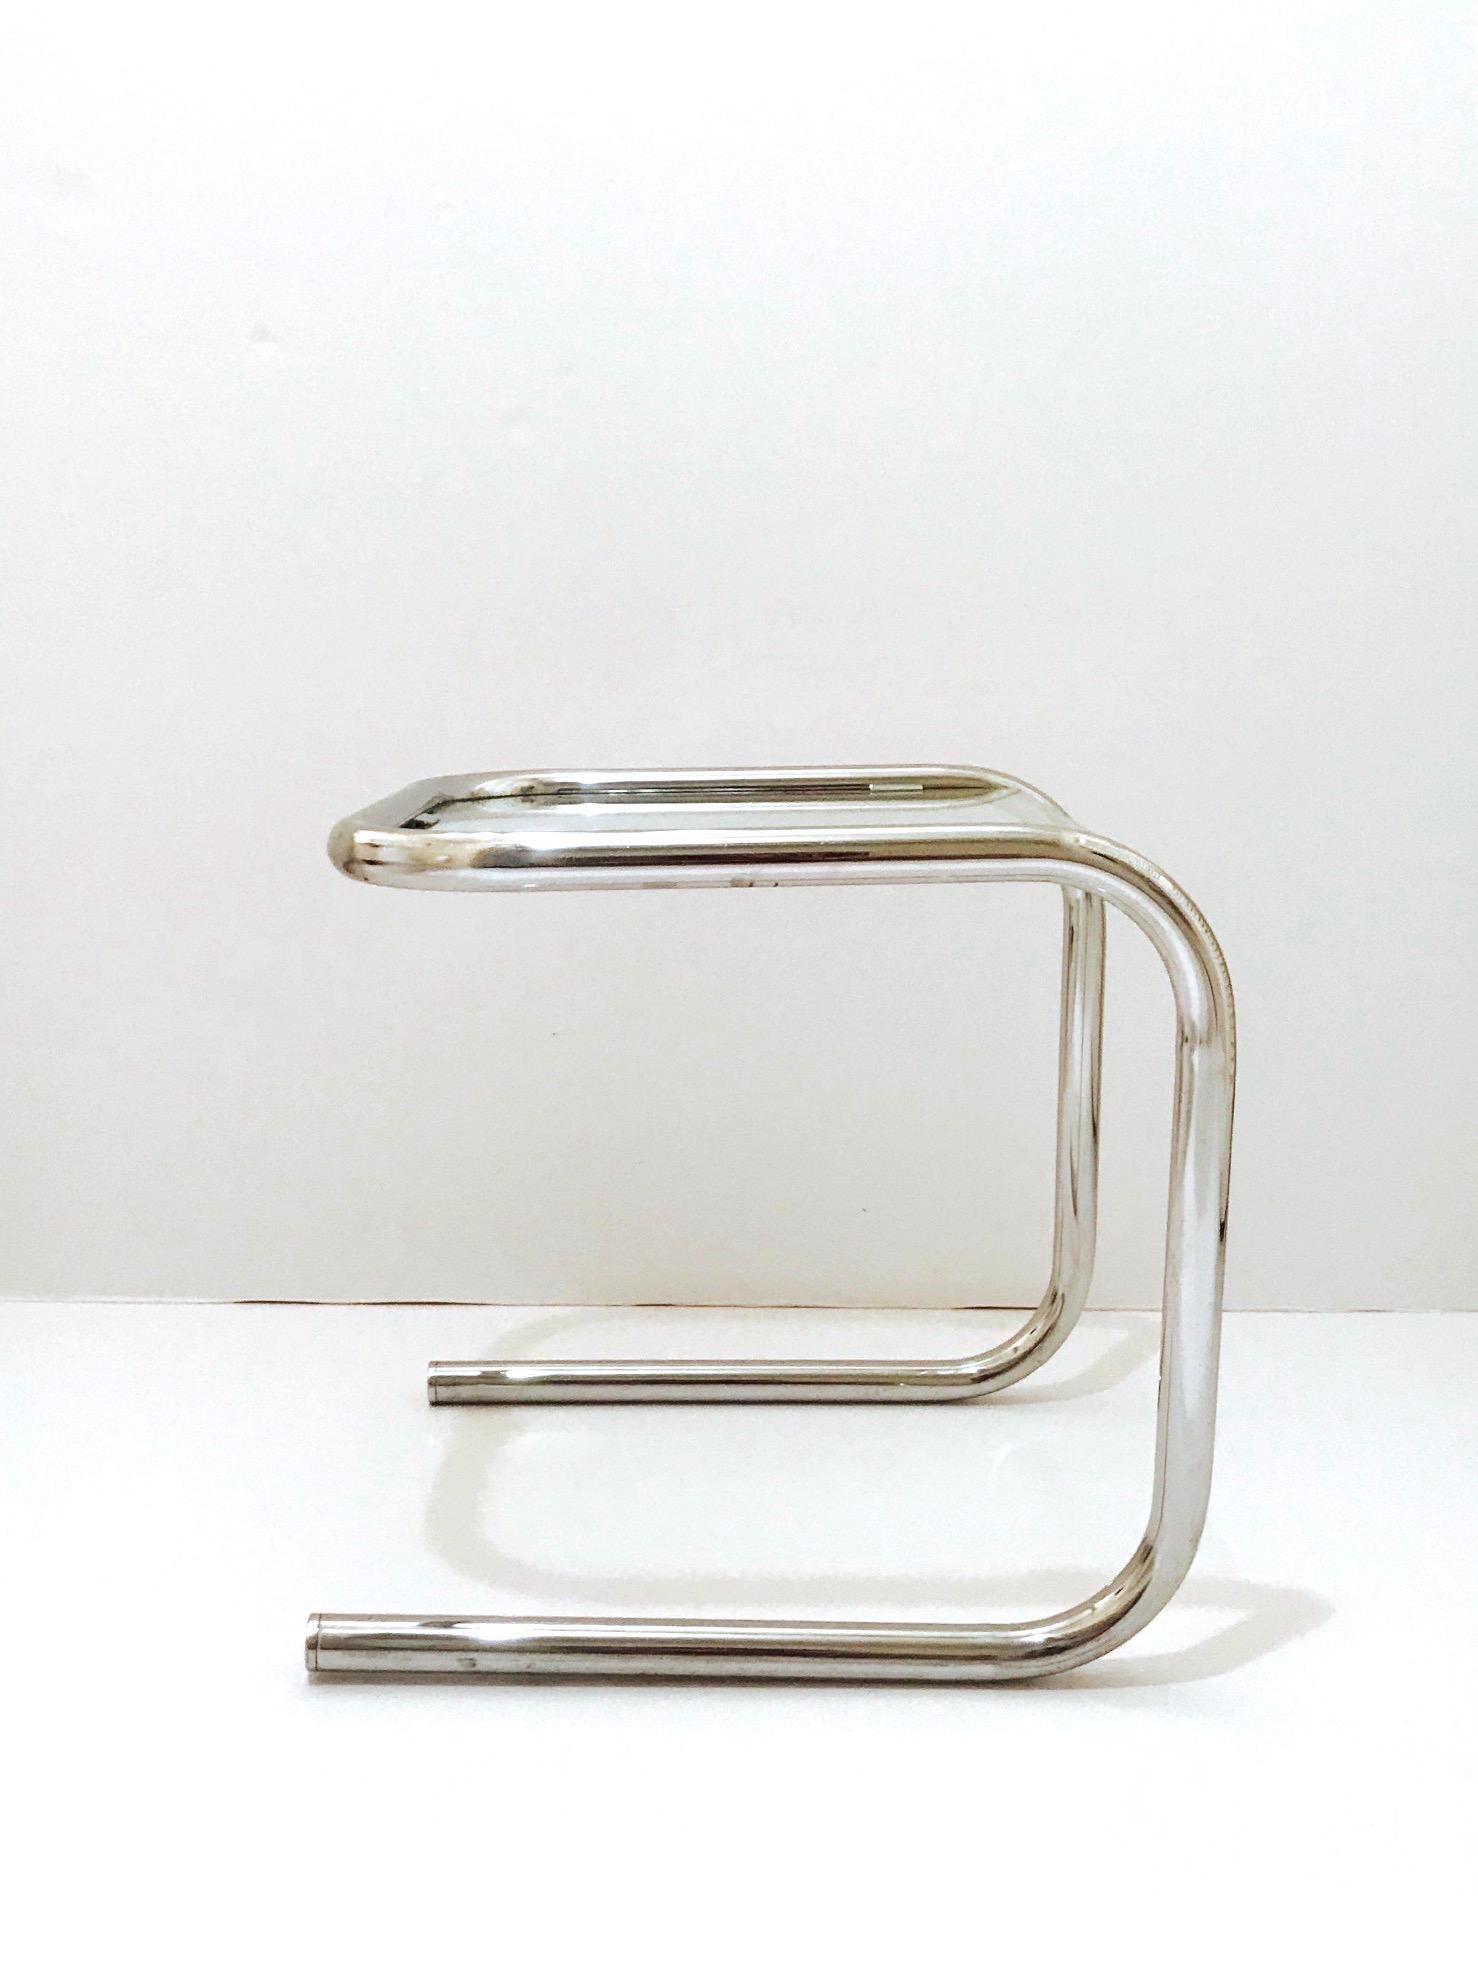 Bauhaus Mid-Century Modern Tubular Chrome Side Table in the Style of Thonet, 1960s